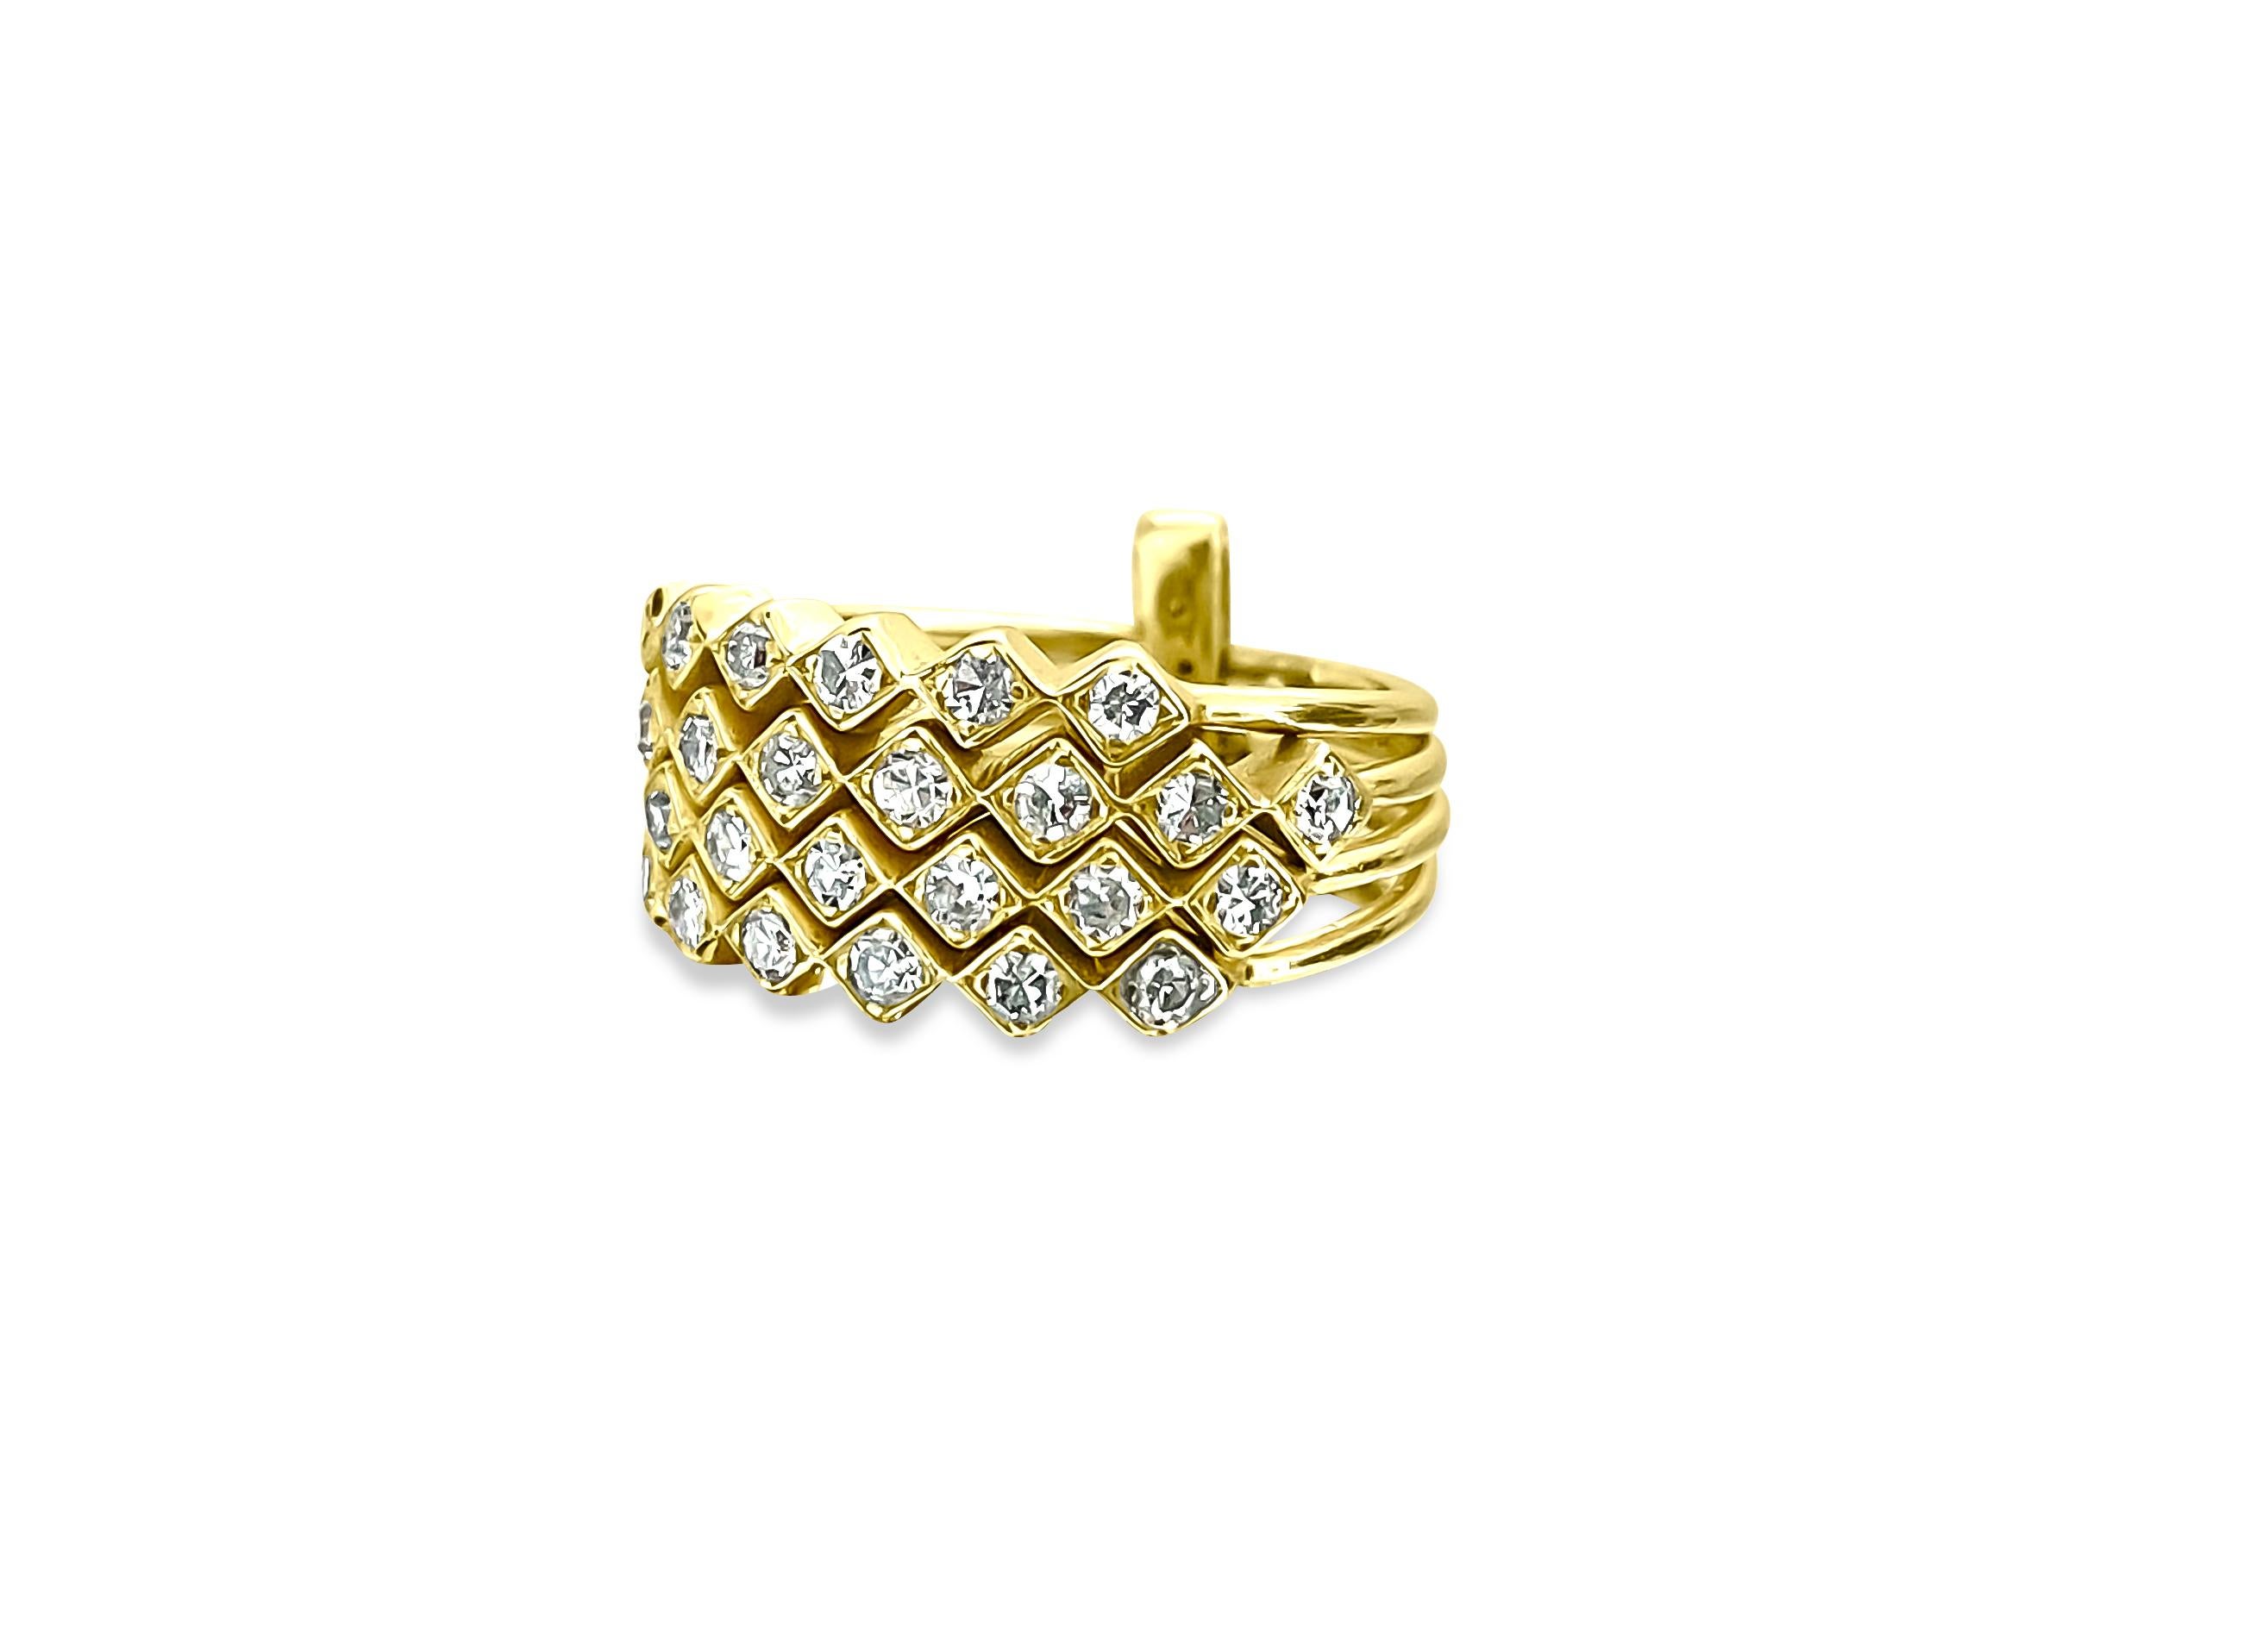 Step into timeless elegance with this vintage 14k yellow gold stack ring adorned with 1.00 carat total of dazzling round brilliant cut diamonds. Each gem, boasting VS clarity and G color, is a genuine and naturally mined treasure.

Key